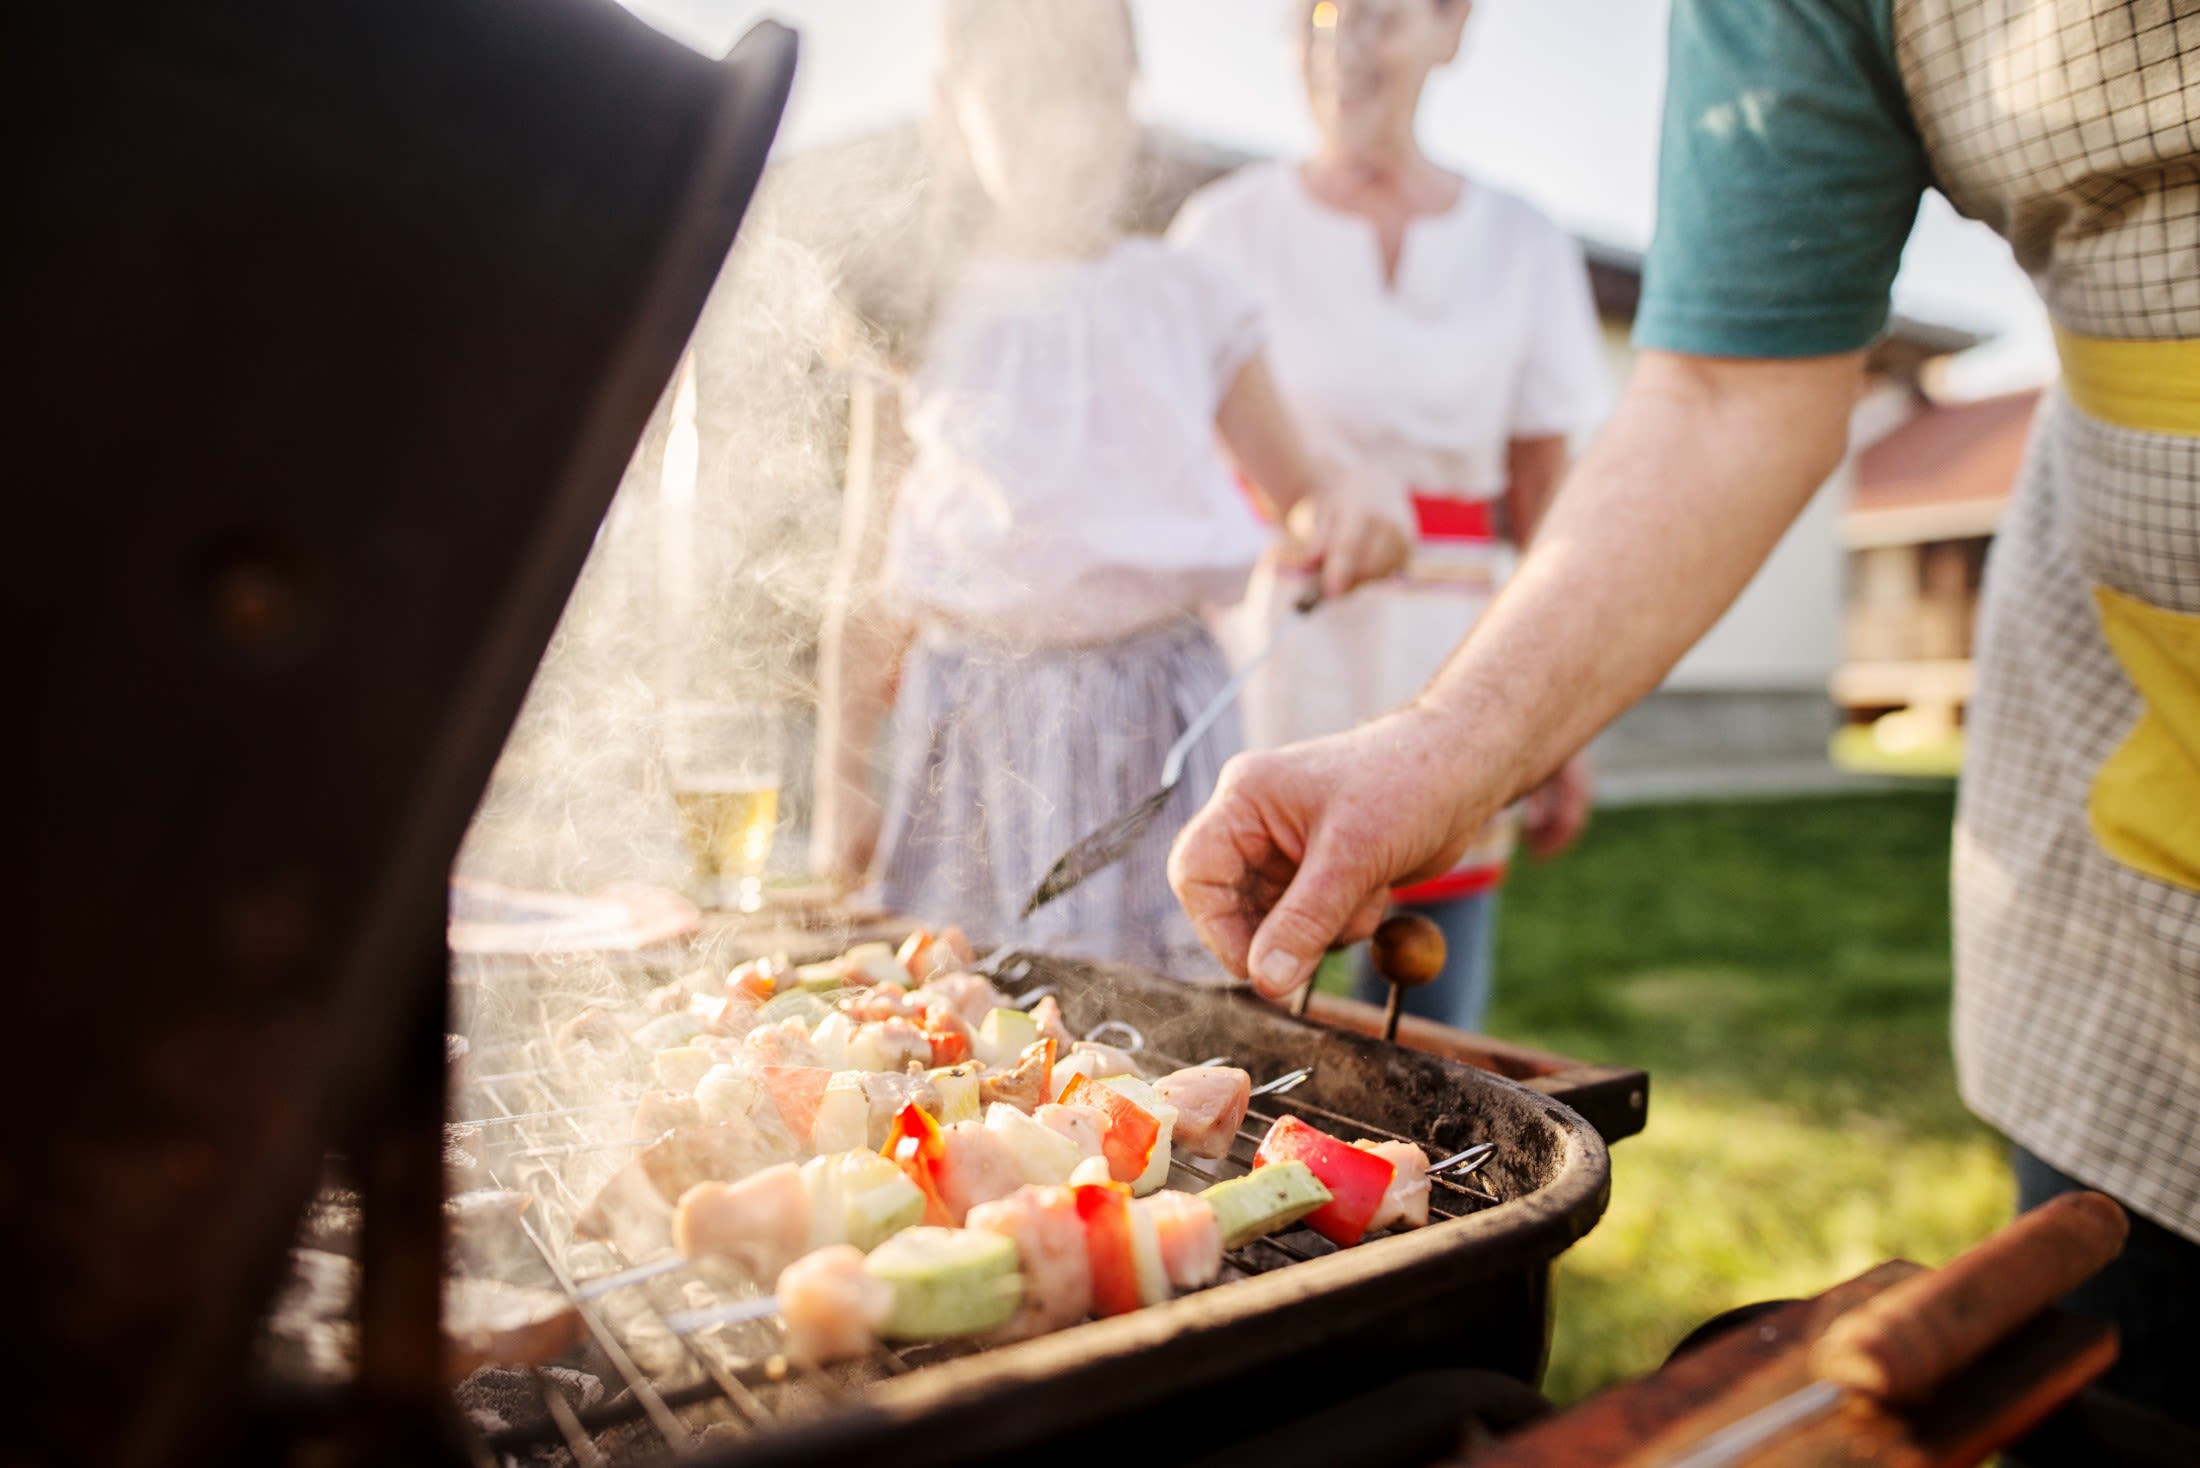 Residents grilling at Wadsworth Shores in Virginia Beach, Virginia